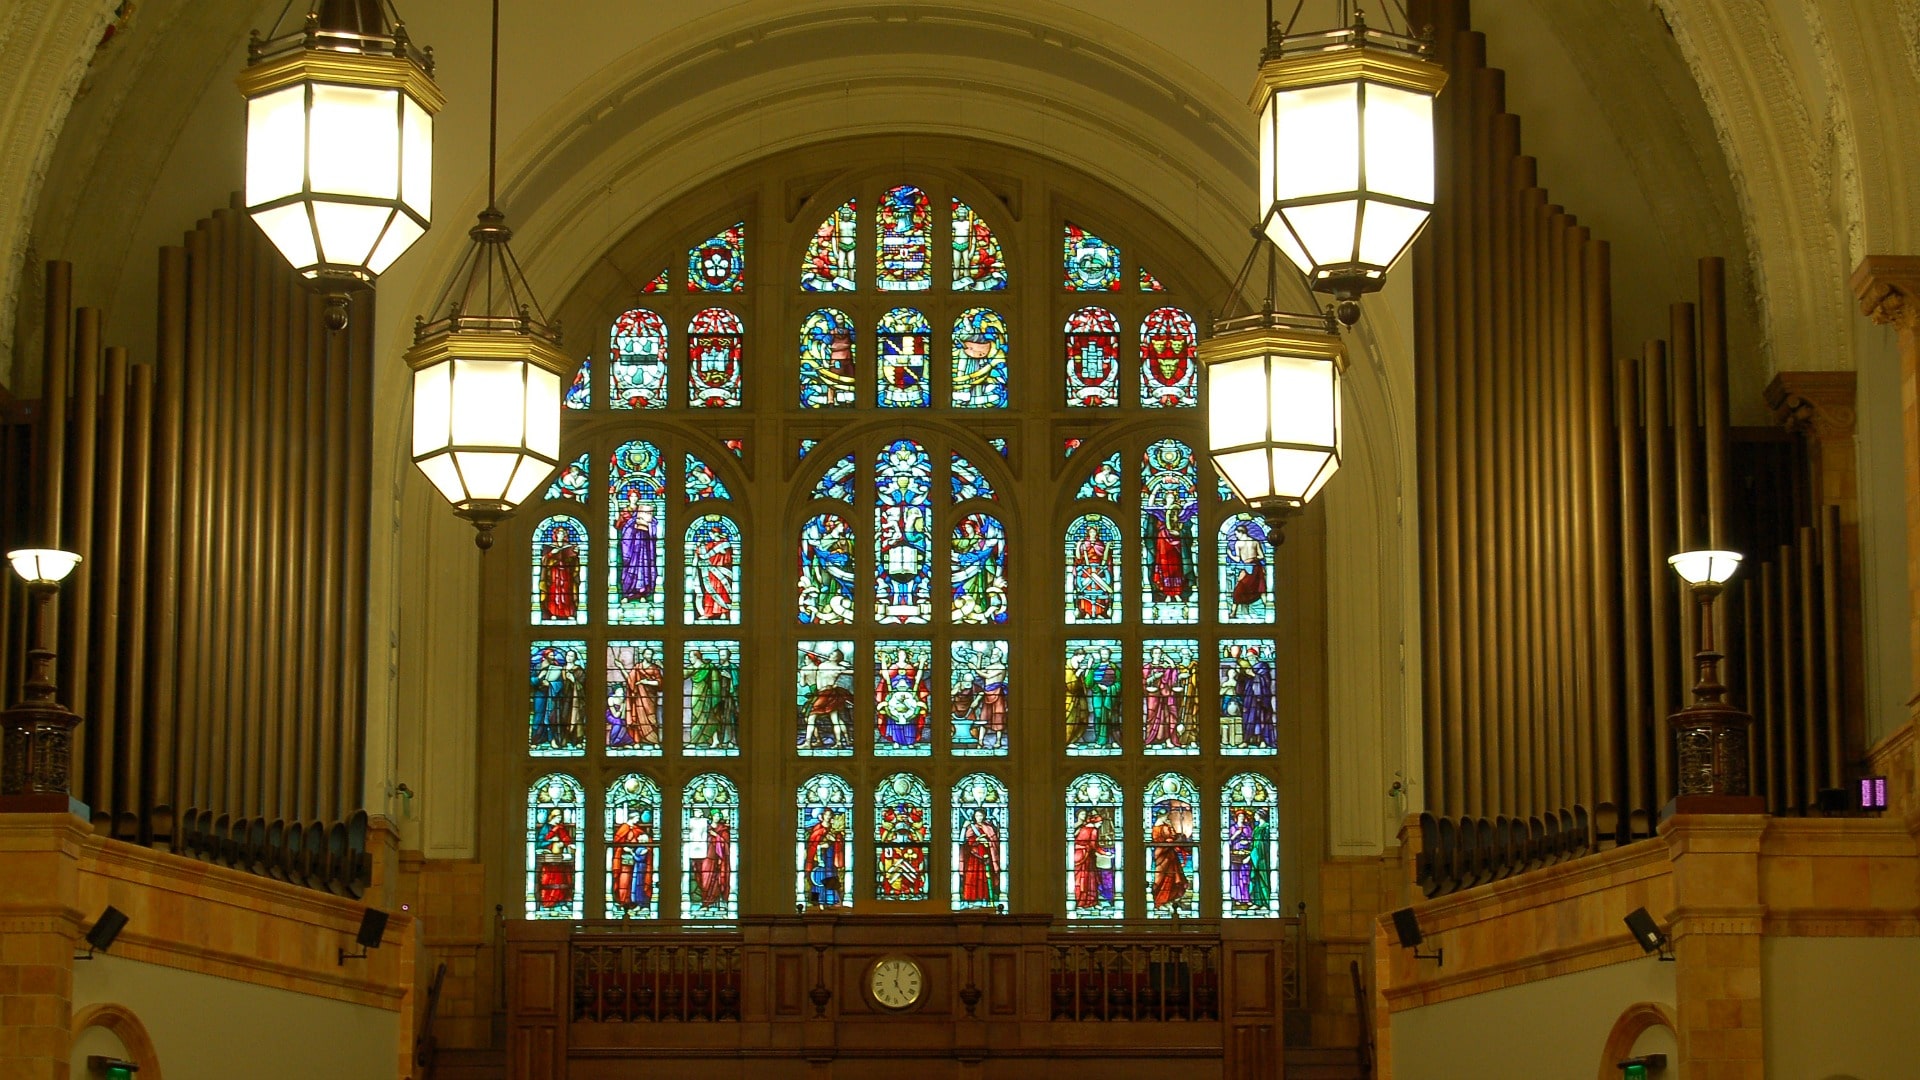 The south window of the Great Hall, University of Birmingham.